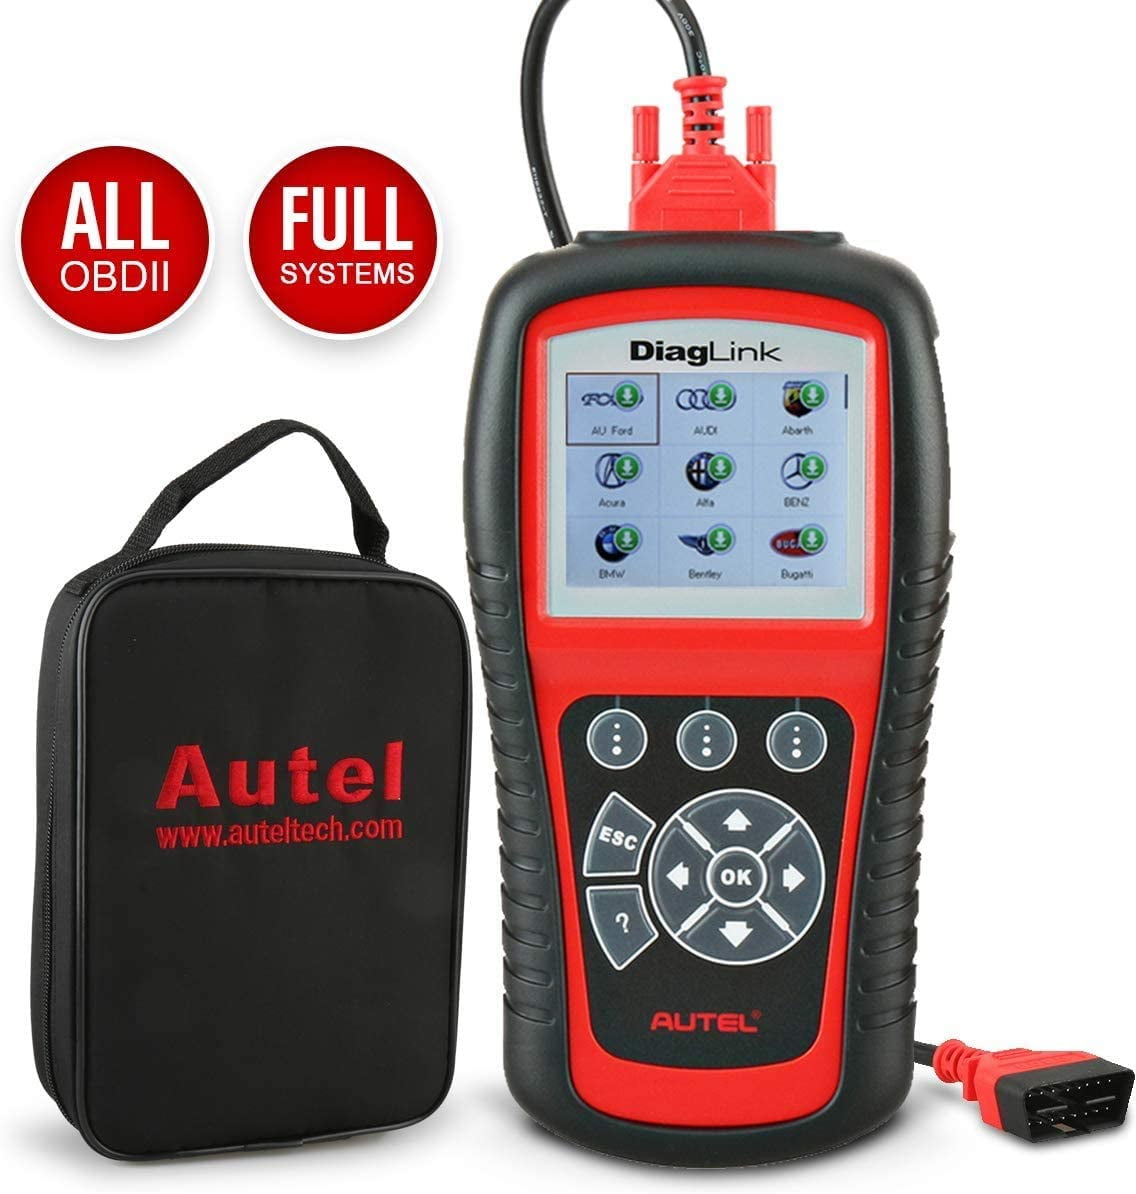 Autel MD806 OBD2 Auto Diagnostic Tool DPF ABS EPB Engine SRS Better MD802 MD805 